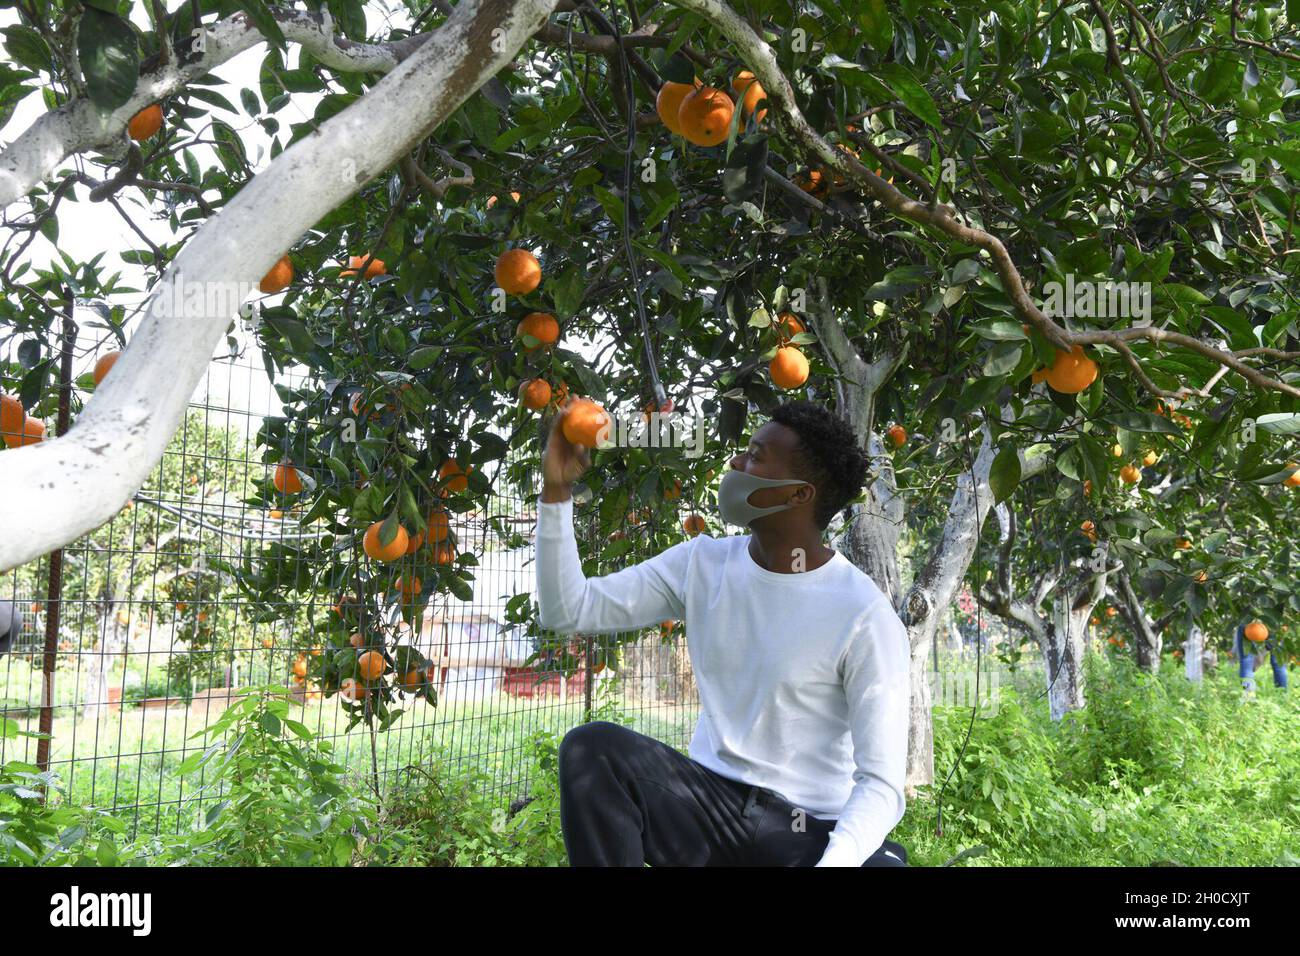 Gunner's Mate Seaman Marcel Baines examines an orange he picked from an orange tree during a community relations event in Chania, Crete on January 26, 2021. Stock Photo